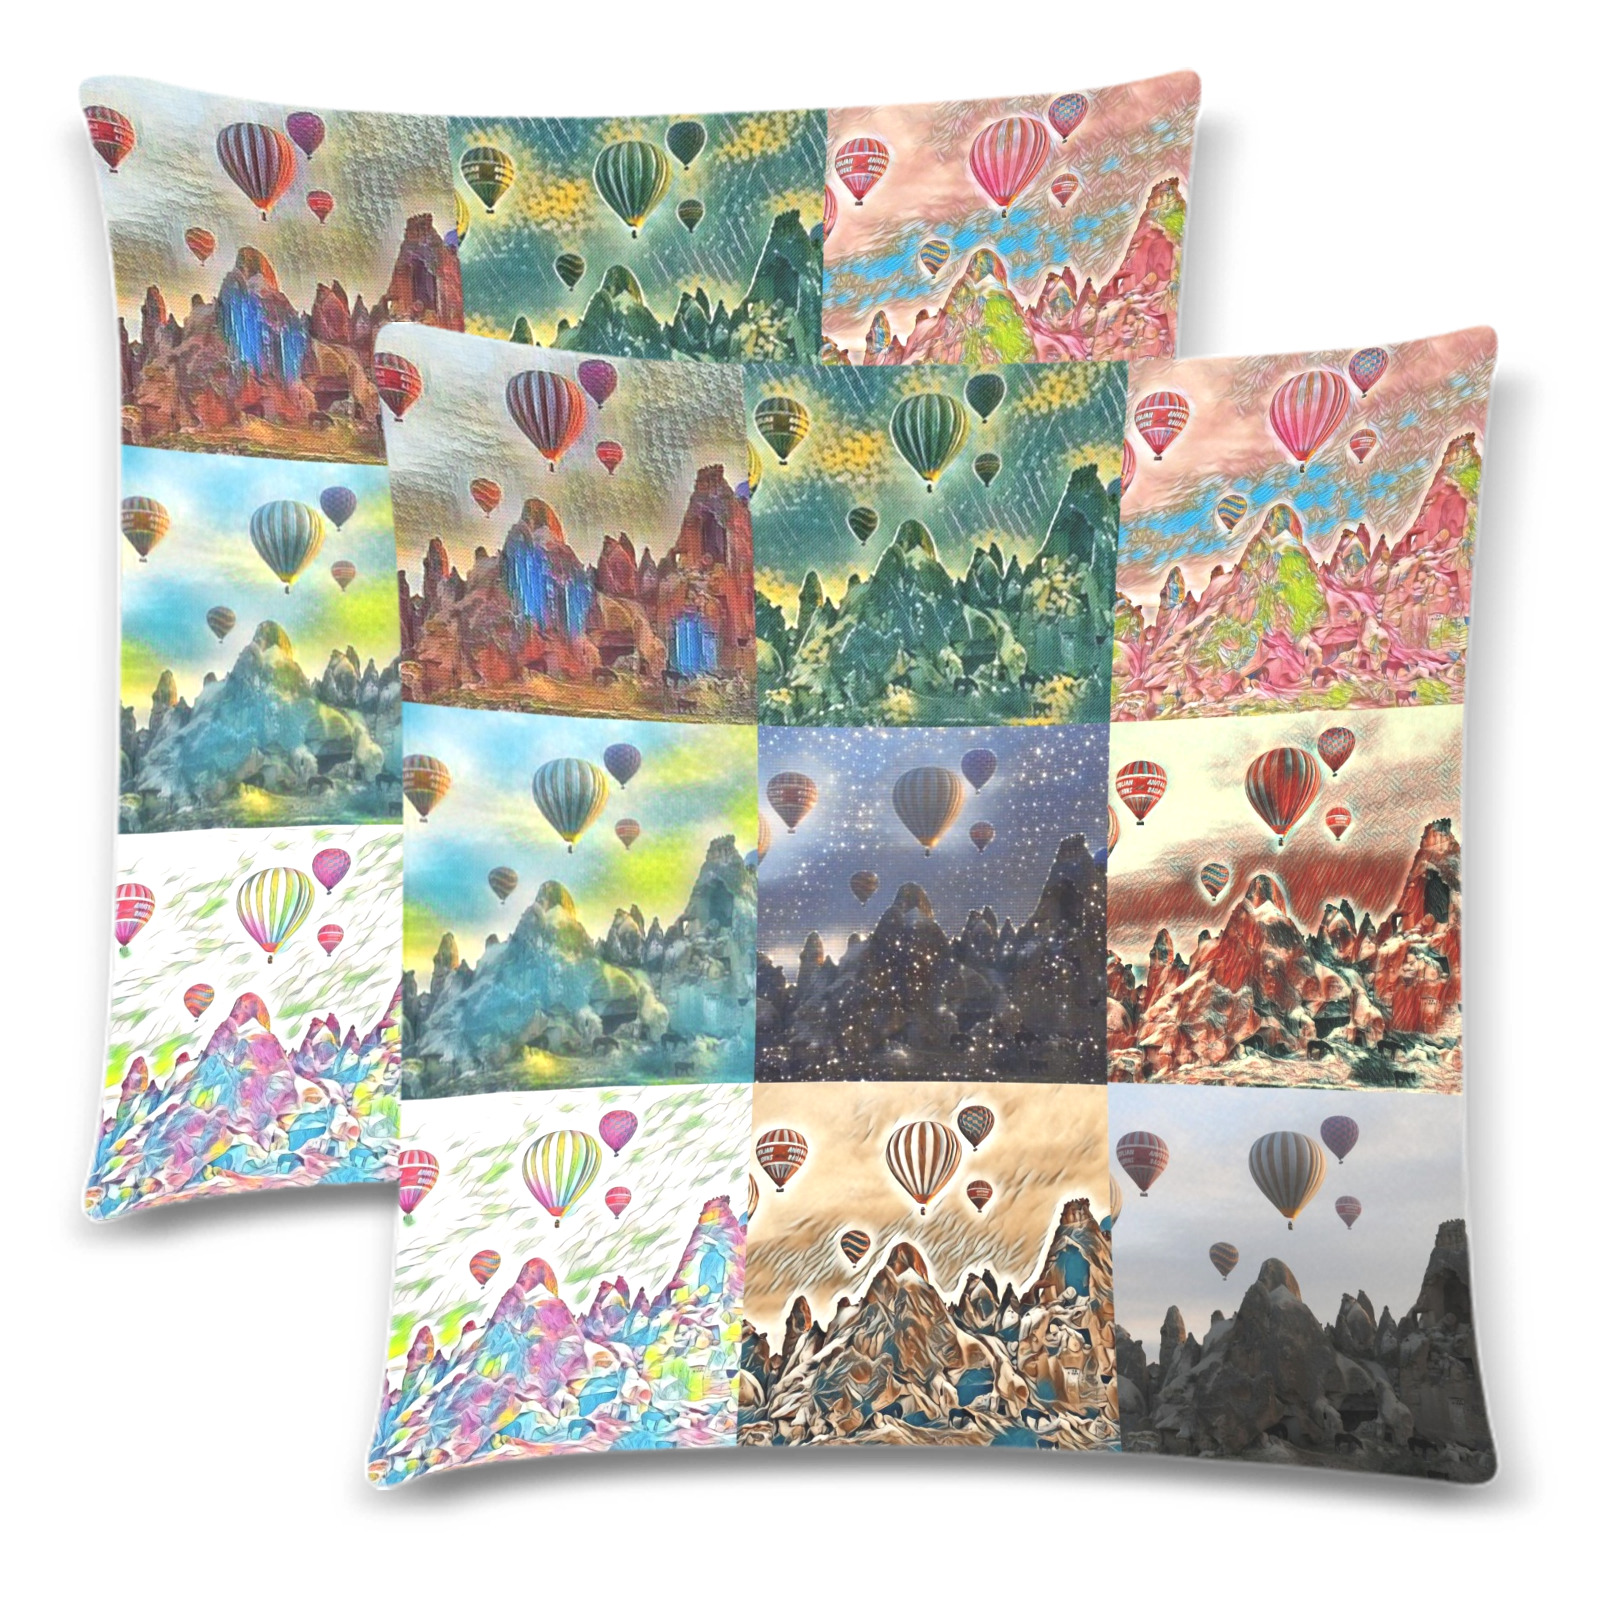 Cappadocia, Central Anatolia, Turkey Collage Custom Zippered Pillow Cases 18"x 18" (Twin Sides) (Set of 2)